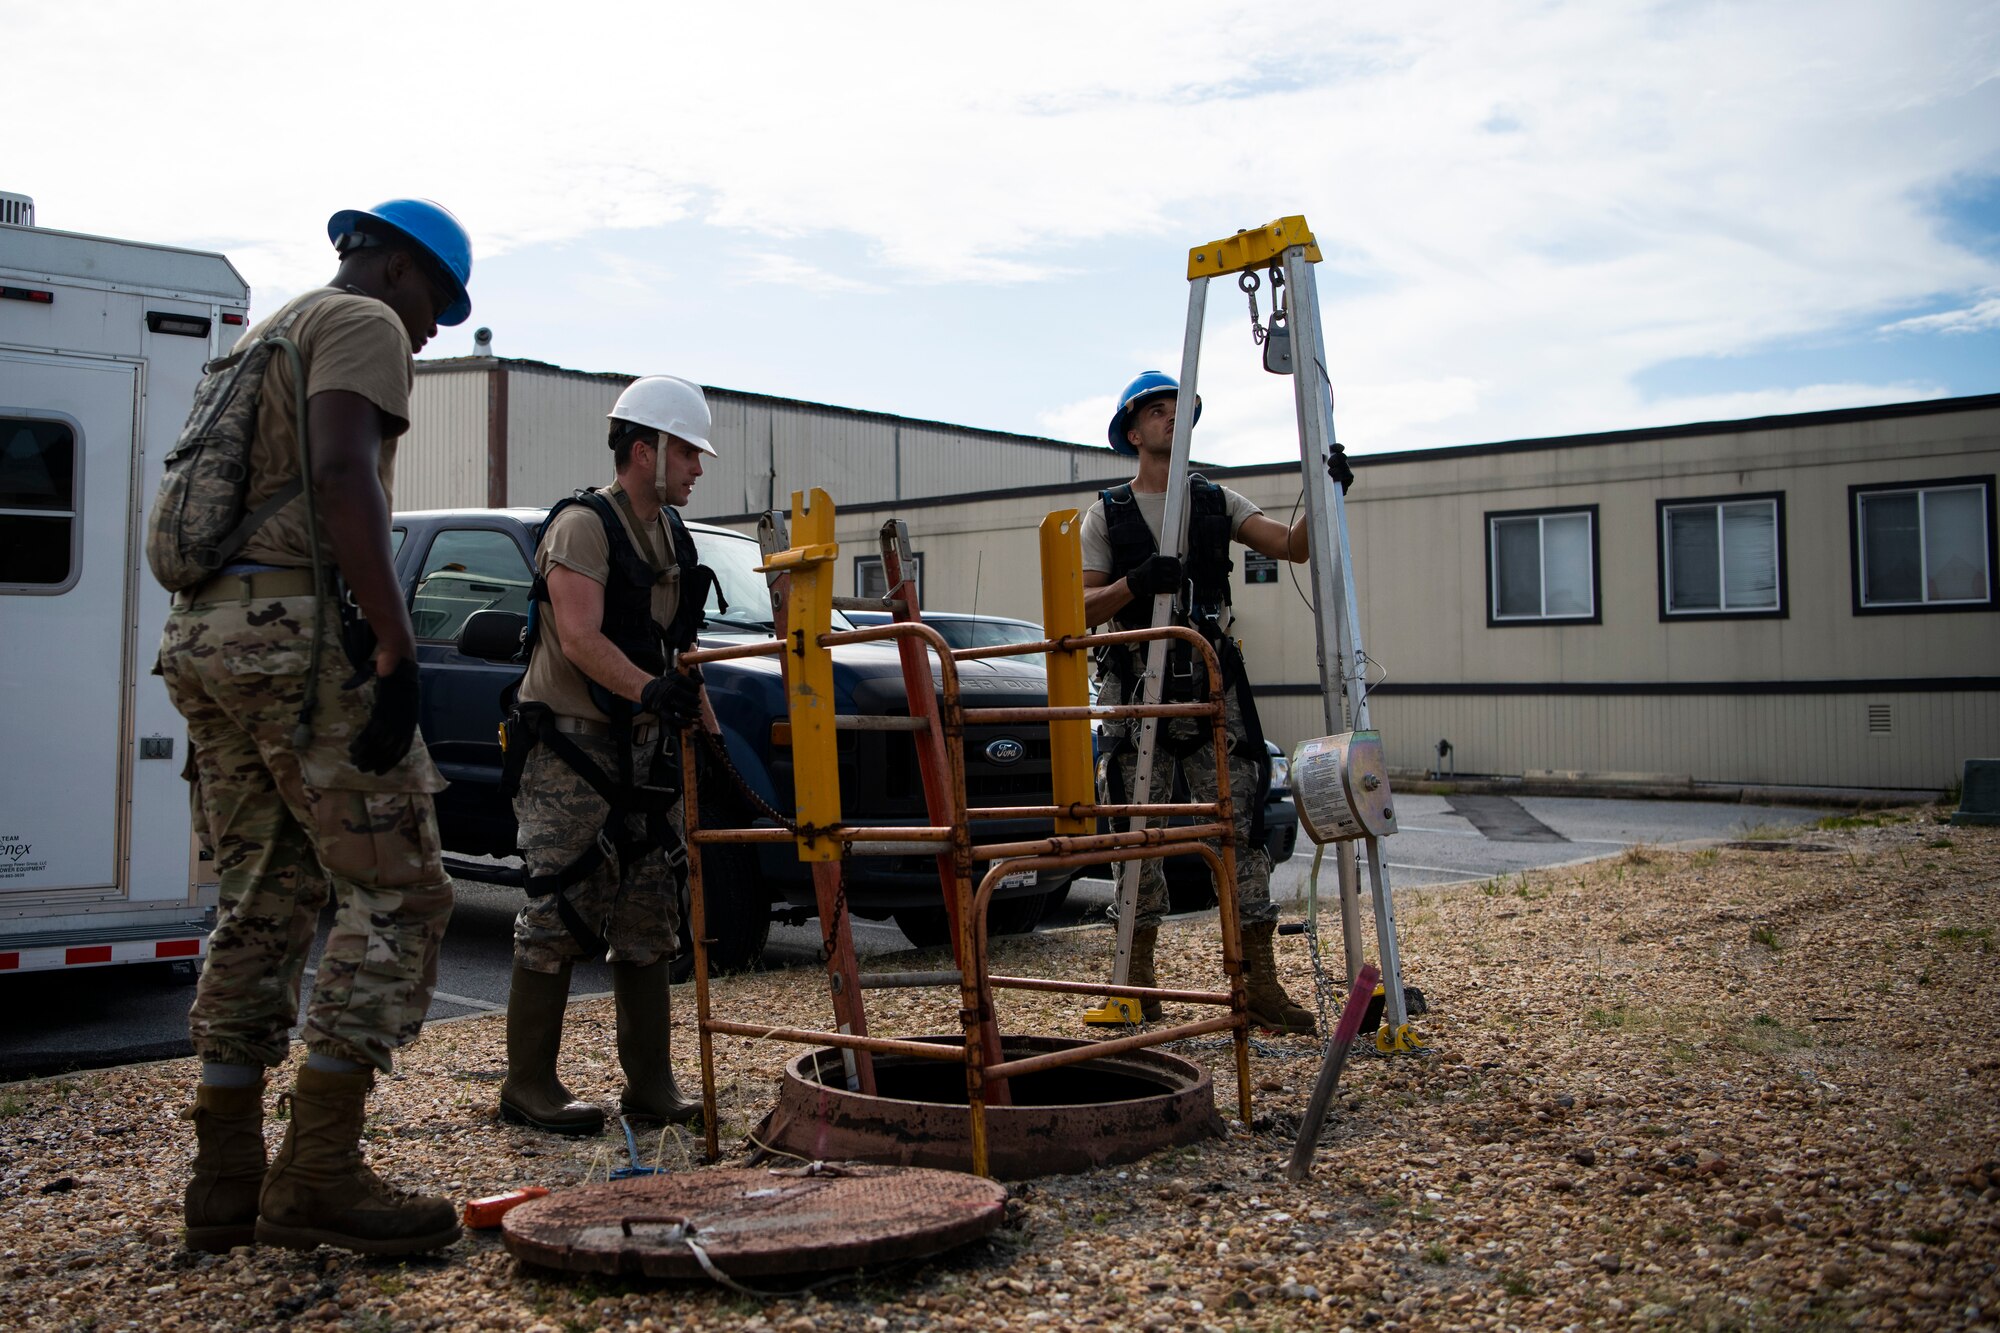 U.S. Air Force Senior Airman Darren Perry, left, Staff Sgt. Jesse Laclair, center, and Airman 1st Class Emmanuel Jackson-Wilson, right, cable antenna systems technicians with the 85th Engineering Installation Squadron assigned to Keesler Air Force Base, Mississippi, prepare to enter a manhole at Tyndall Air Force Base, Florida, Aug. 28, 2020. The 85th EIS has made multiple trips to Tyndall to assist the 325th Communications Squadron with relocating information transfer nodes. (U.S. Air Force photo by Tech. Sgt. Clayton Lenhardt)